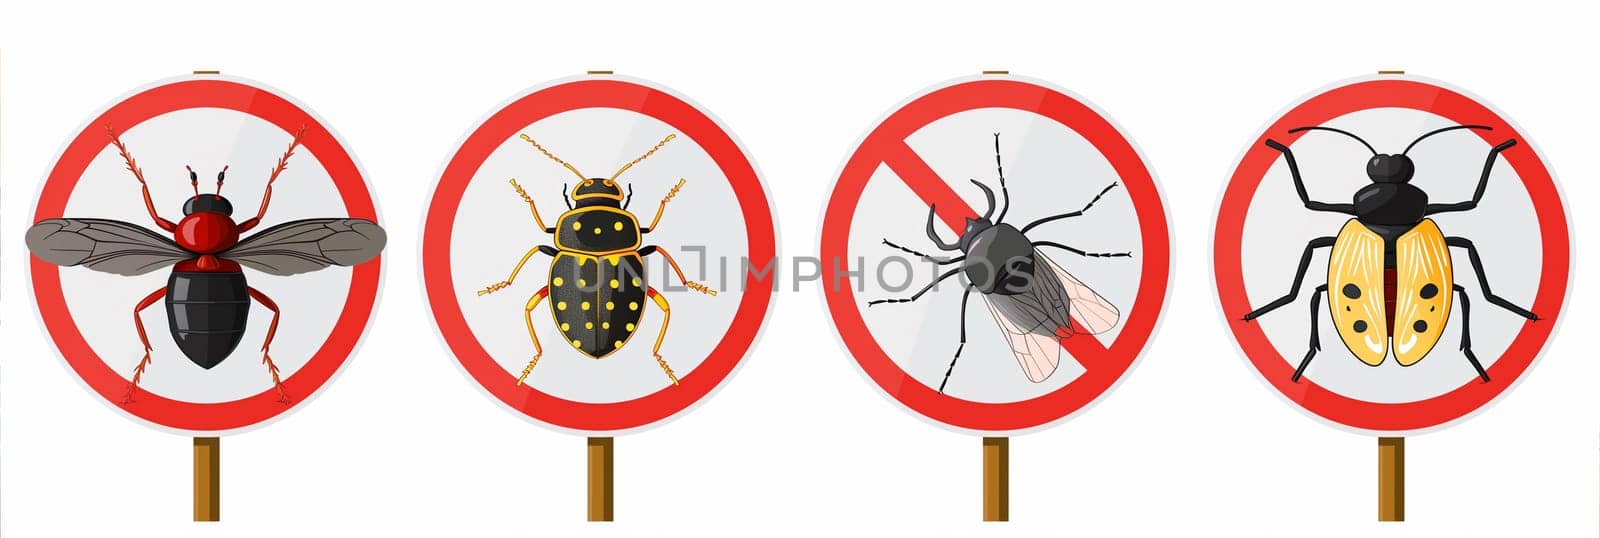 Row of Four Bug Signs in a Line by Sd28DimoN_1976